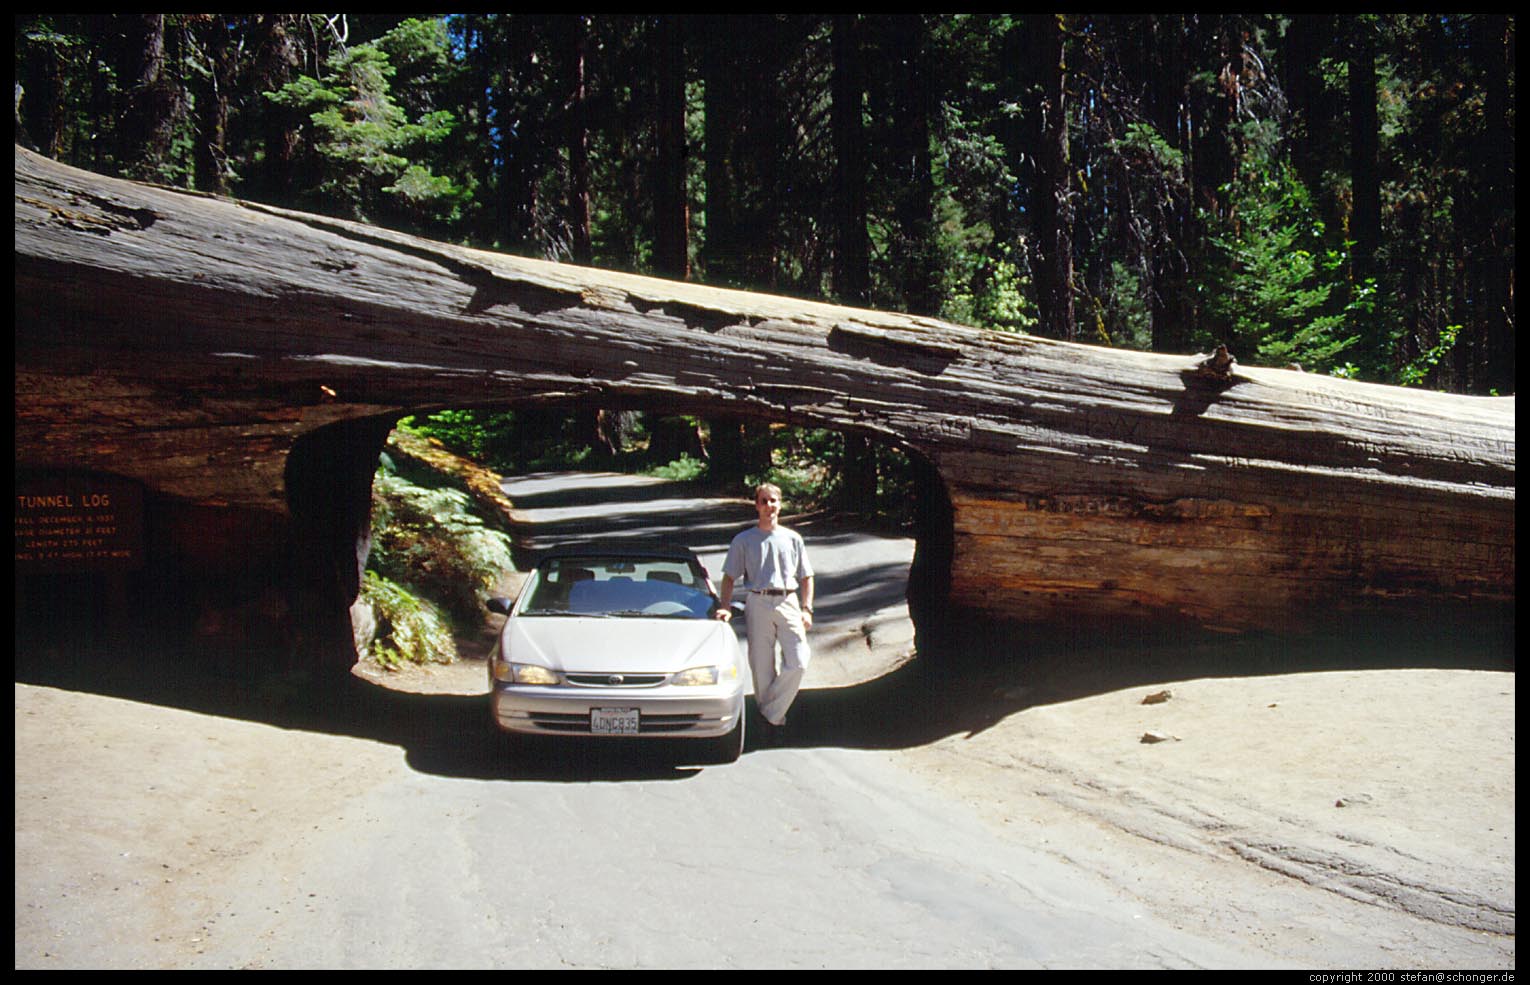 Tunnel Log. Sequoia National Park, CA, Aug 2000